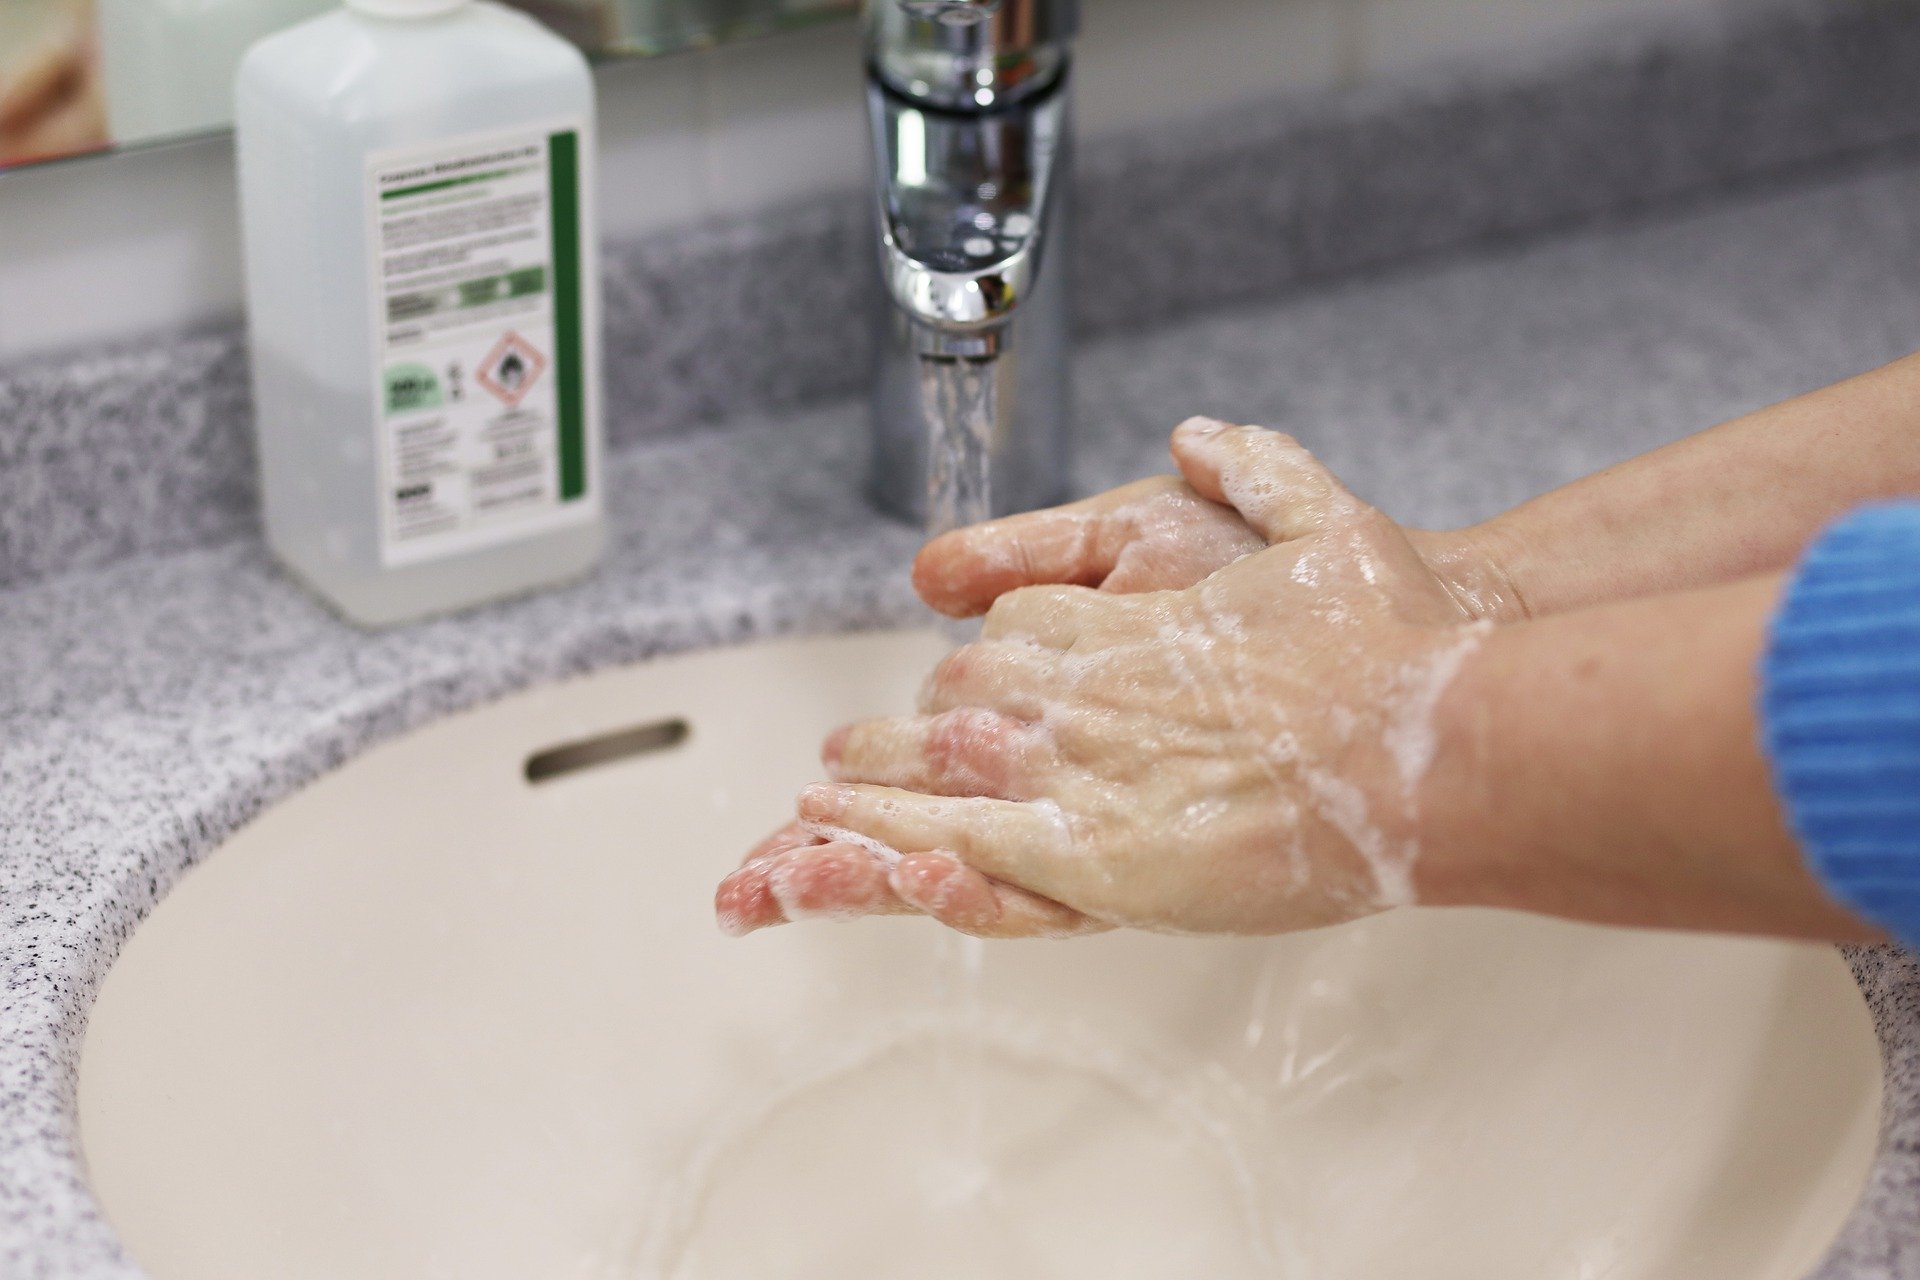 Two hands lathering soap under faucet.